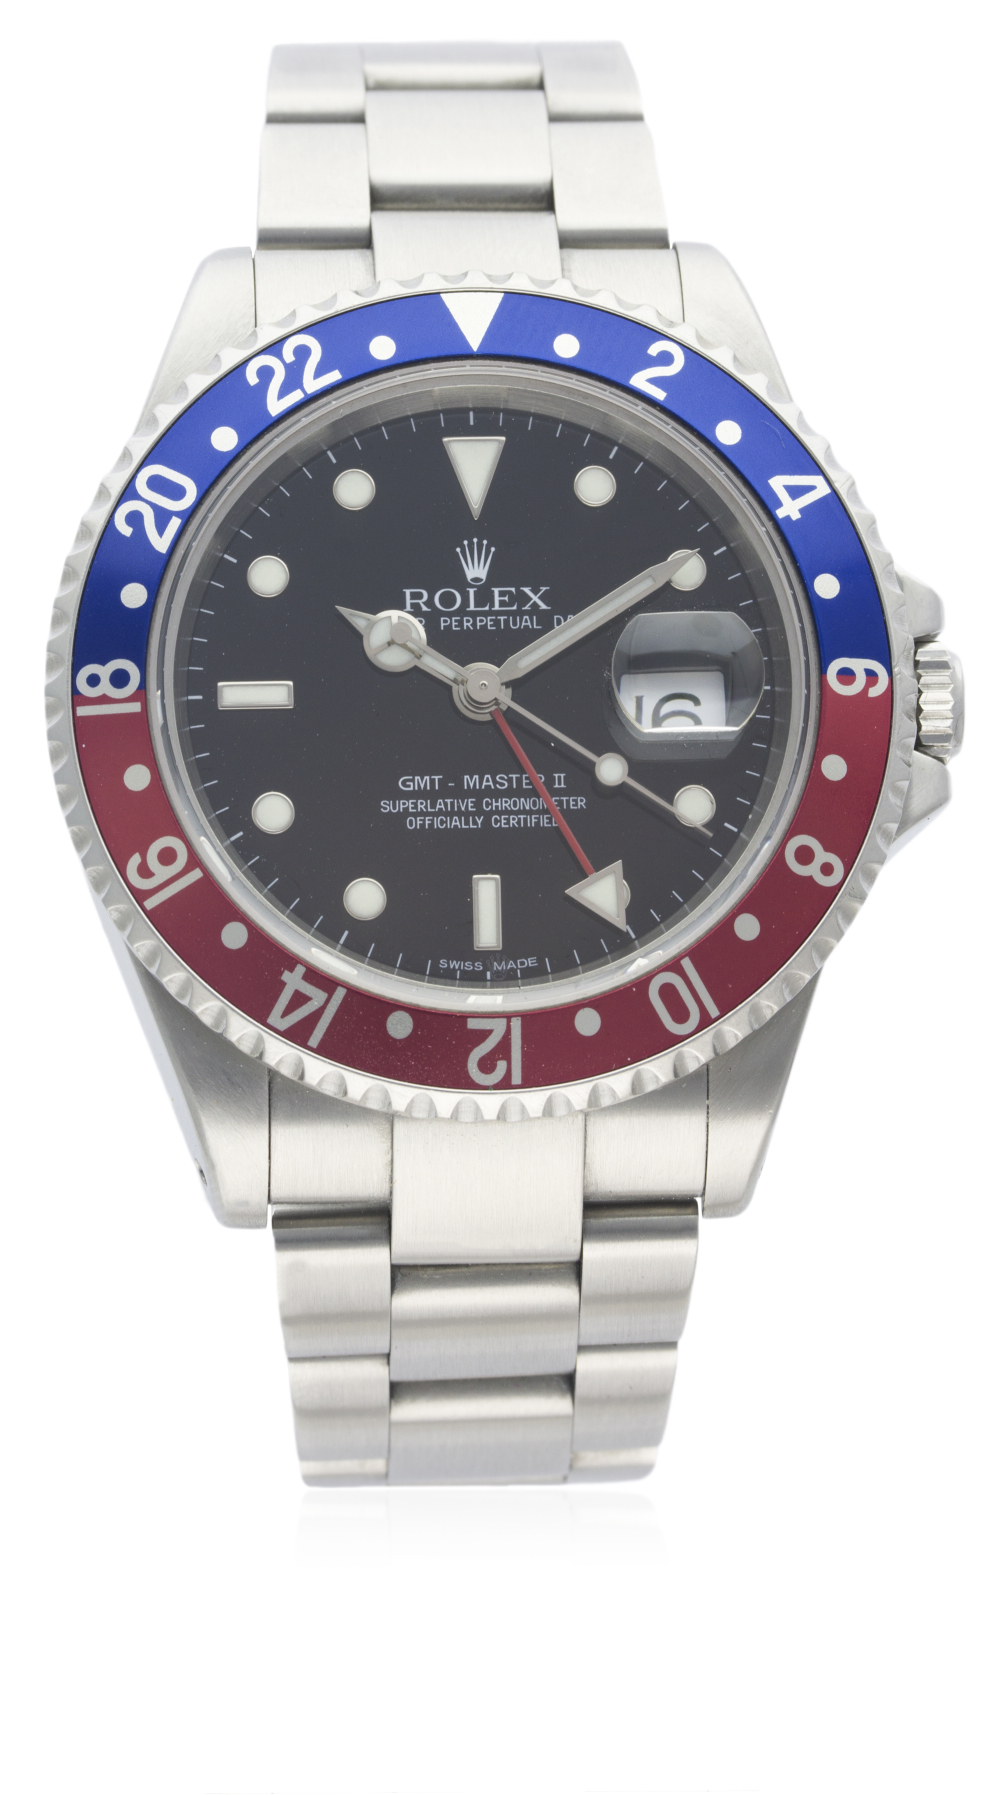 A GENTLEMAN'S STAINLESS STEEL ROLEX OYSTER PERPETUAL DATE GMT MASTER II BRACELET WATCH DATED 2000, - Image 2 of 7